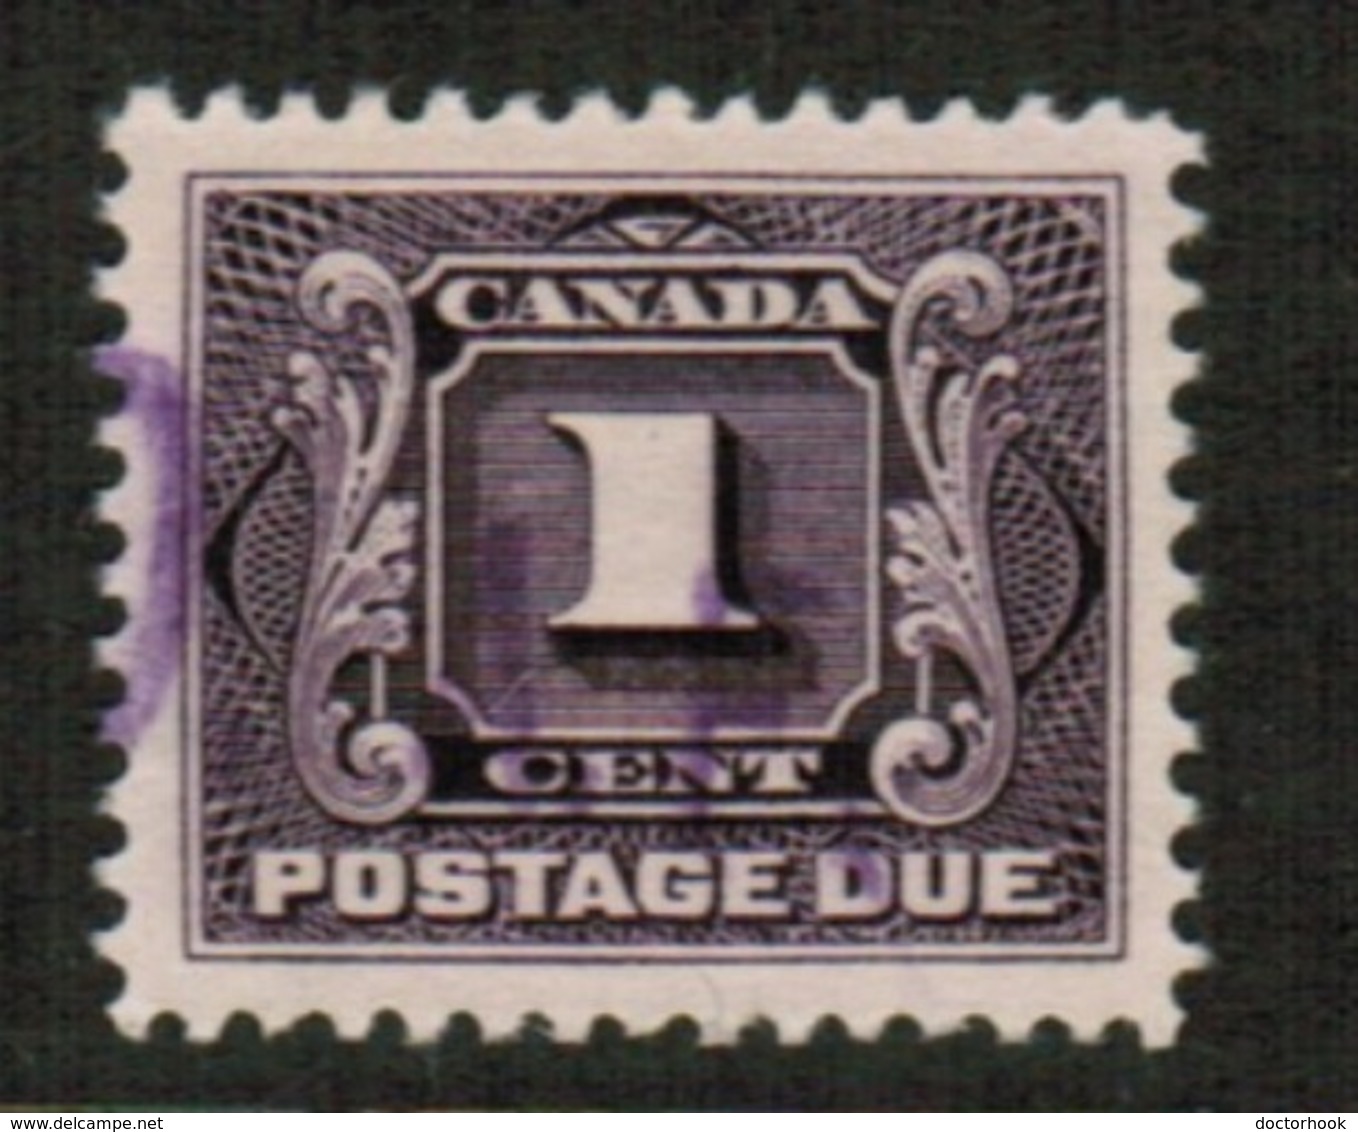 CANADA  Scott # J 1 VF USED (Stamp Scan # 558) - Postage Due